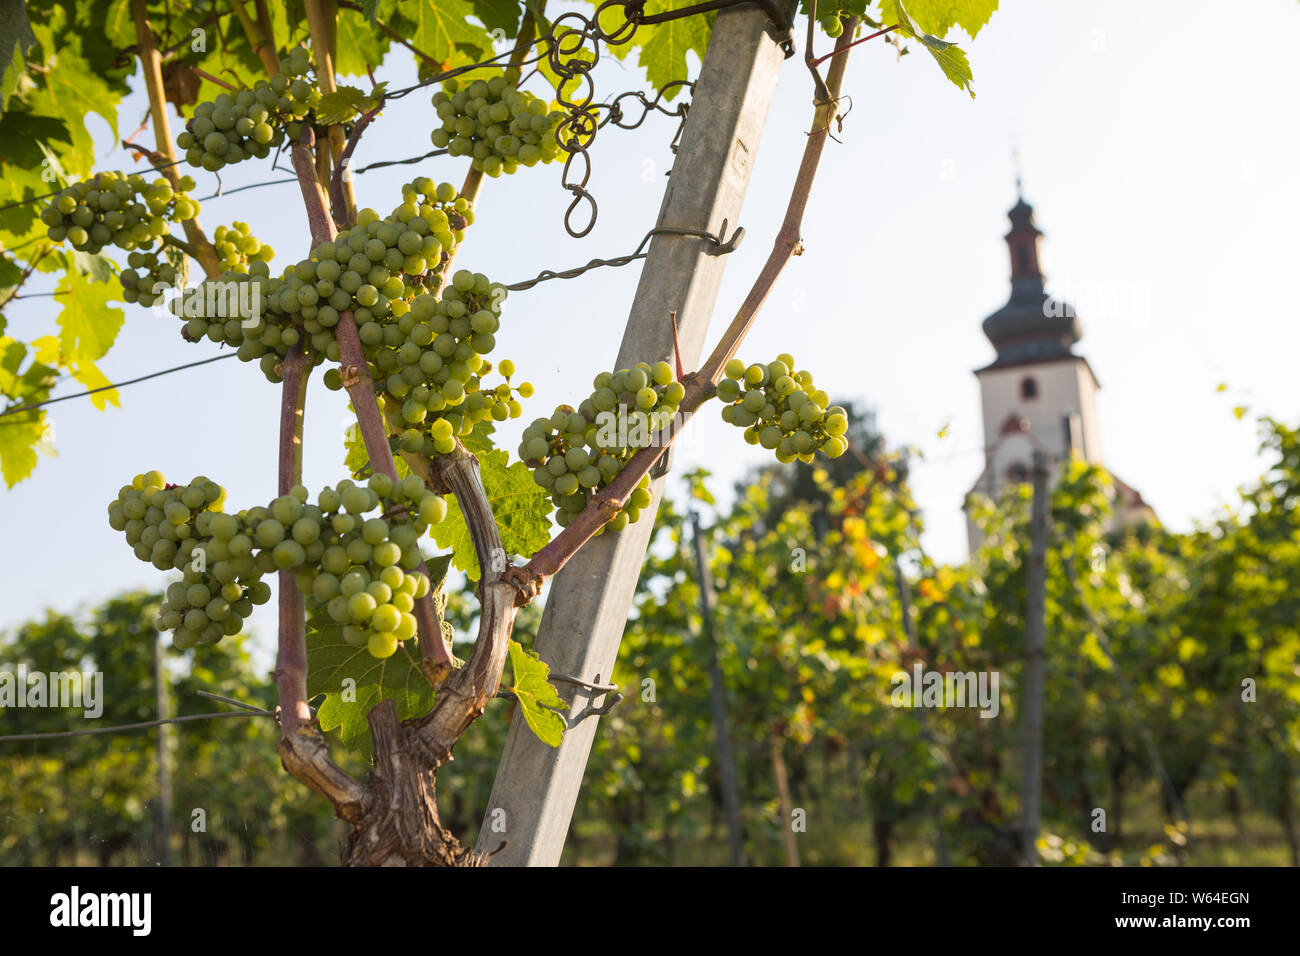 Vineyard in Nierstein, Germany with grapes and a white church building in the background Stock Photo